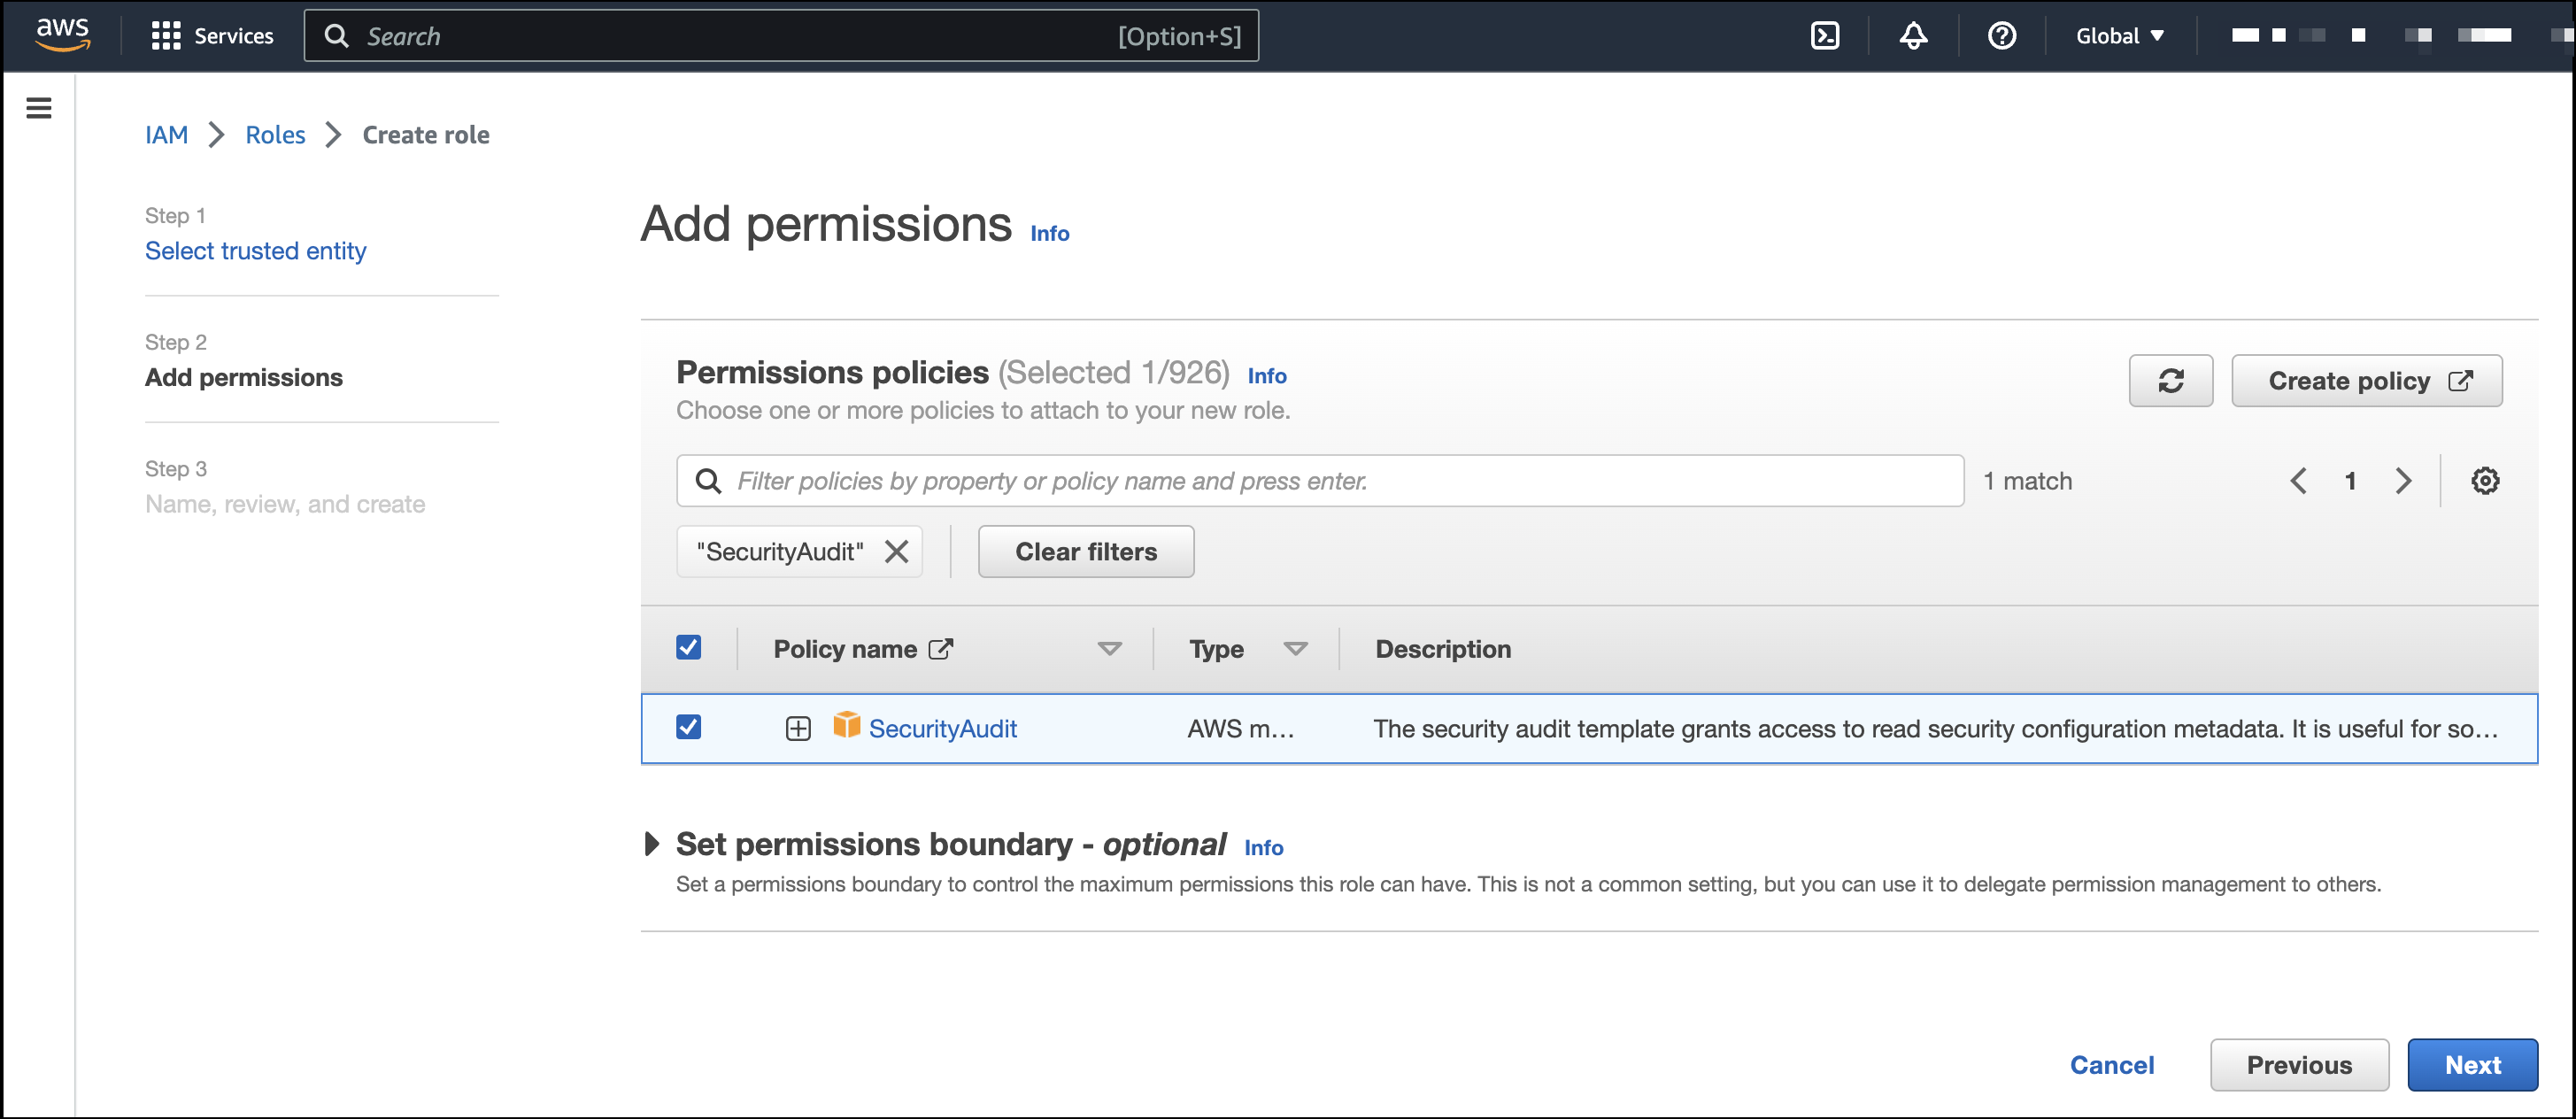 The Add permissions screen in AWS